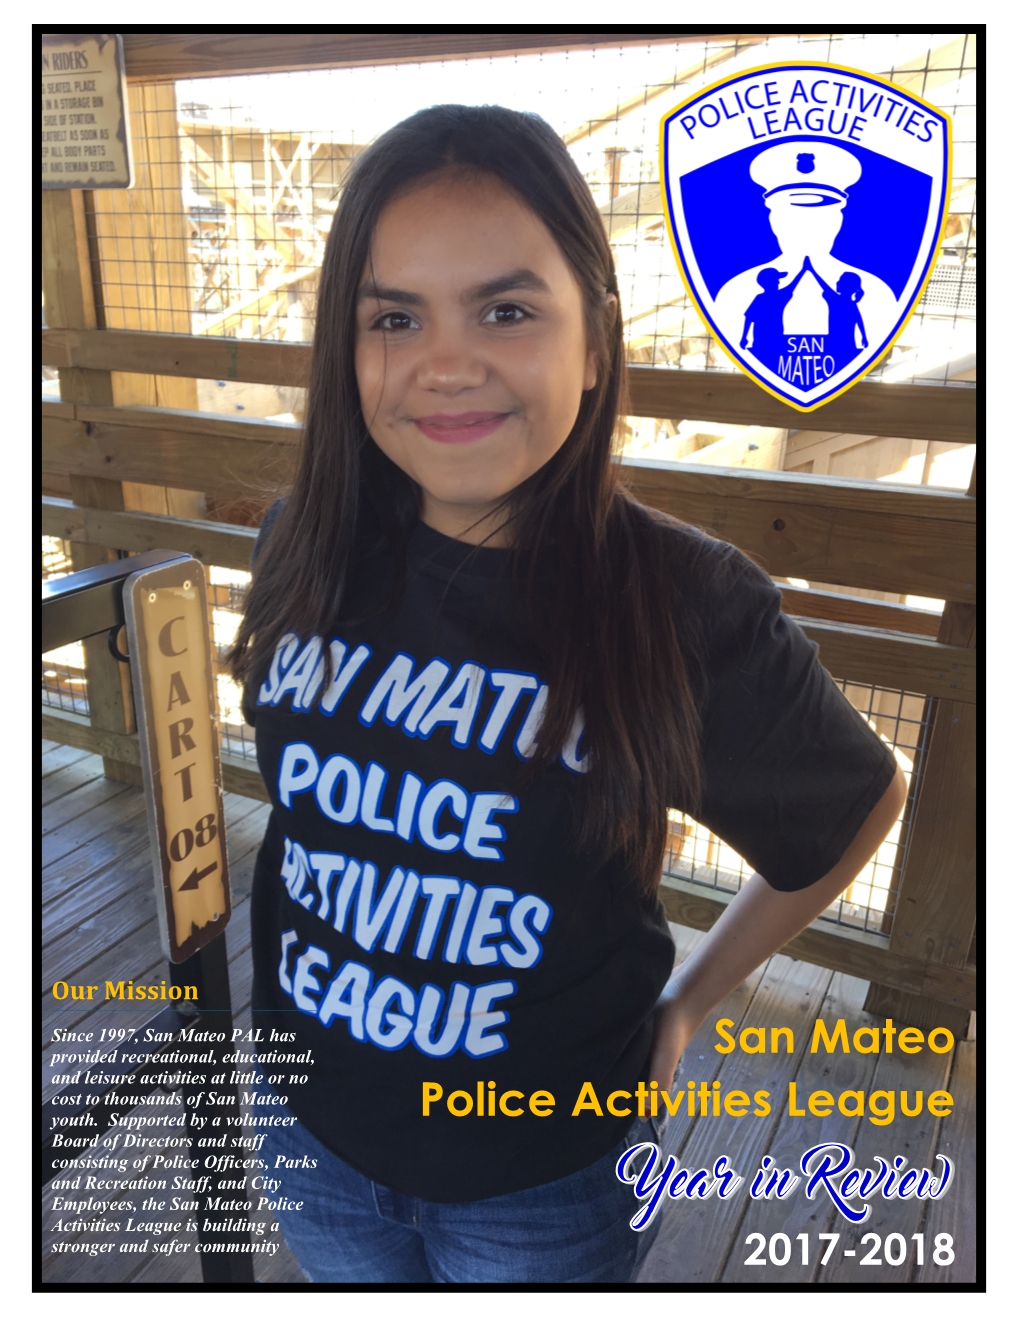 San Mateo Police Activities League Is Building a Stronger and Safer Community 2017-2018 1